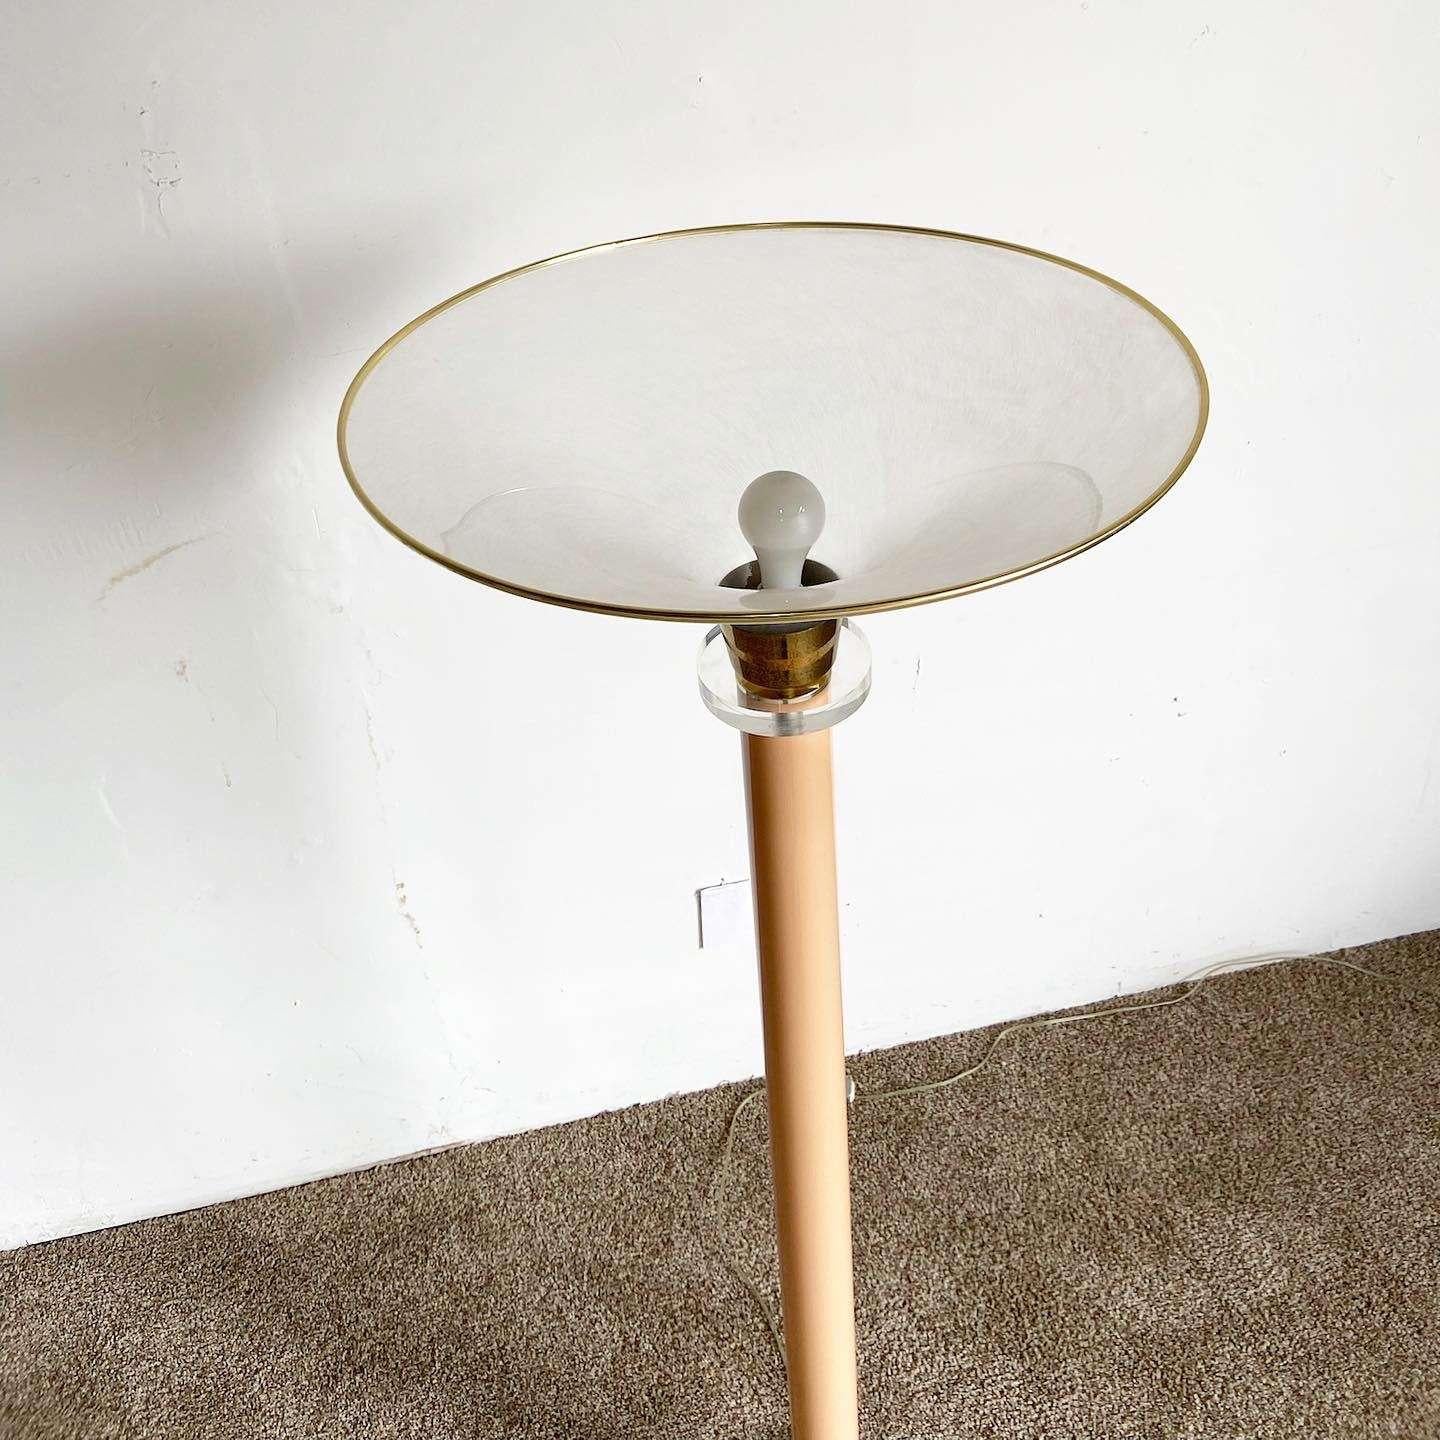 Amazing vintage postmodern dimmable floor lamp. Features a peach stem with lucite and brass accents.